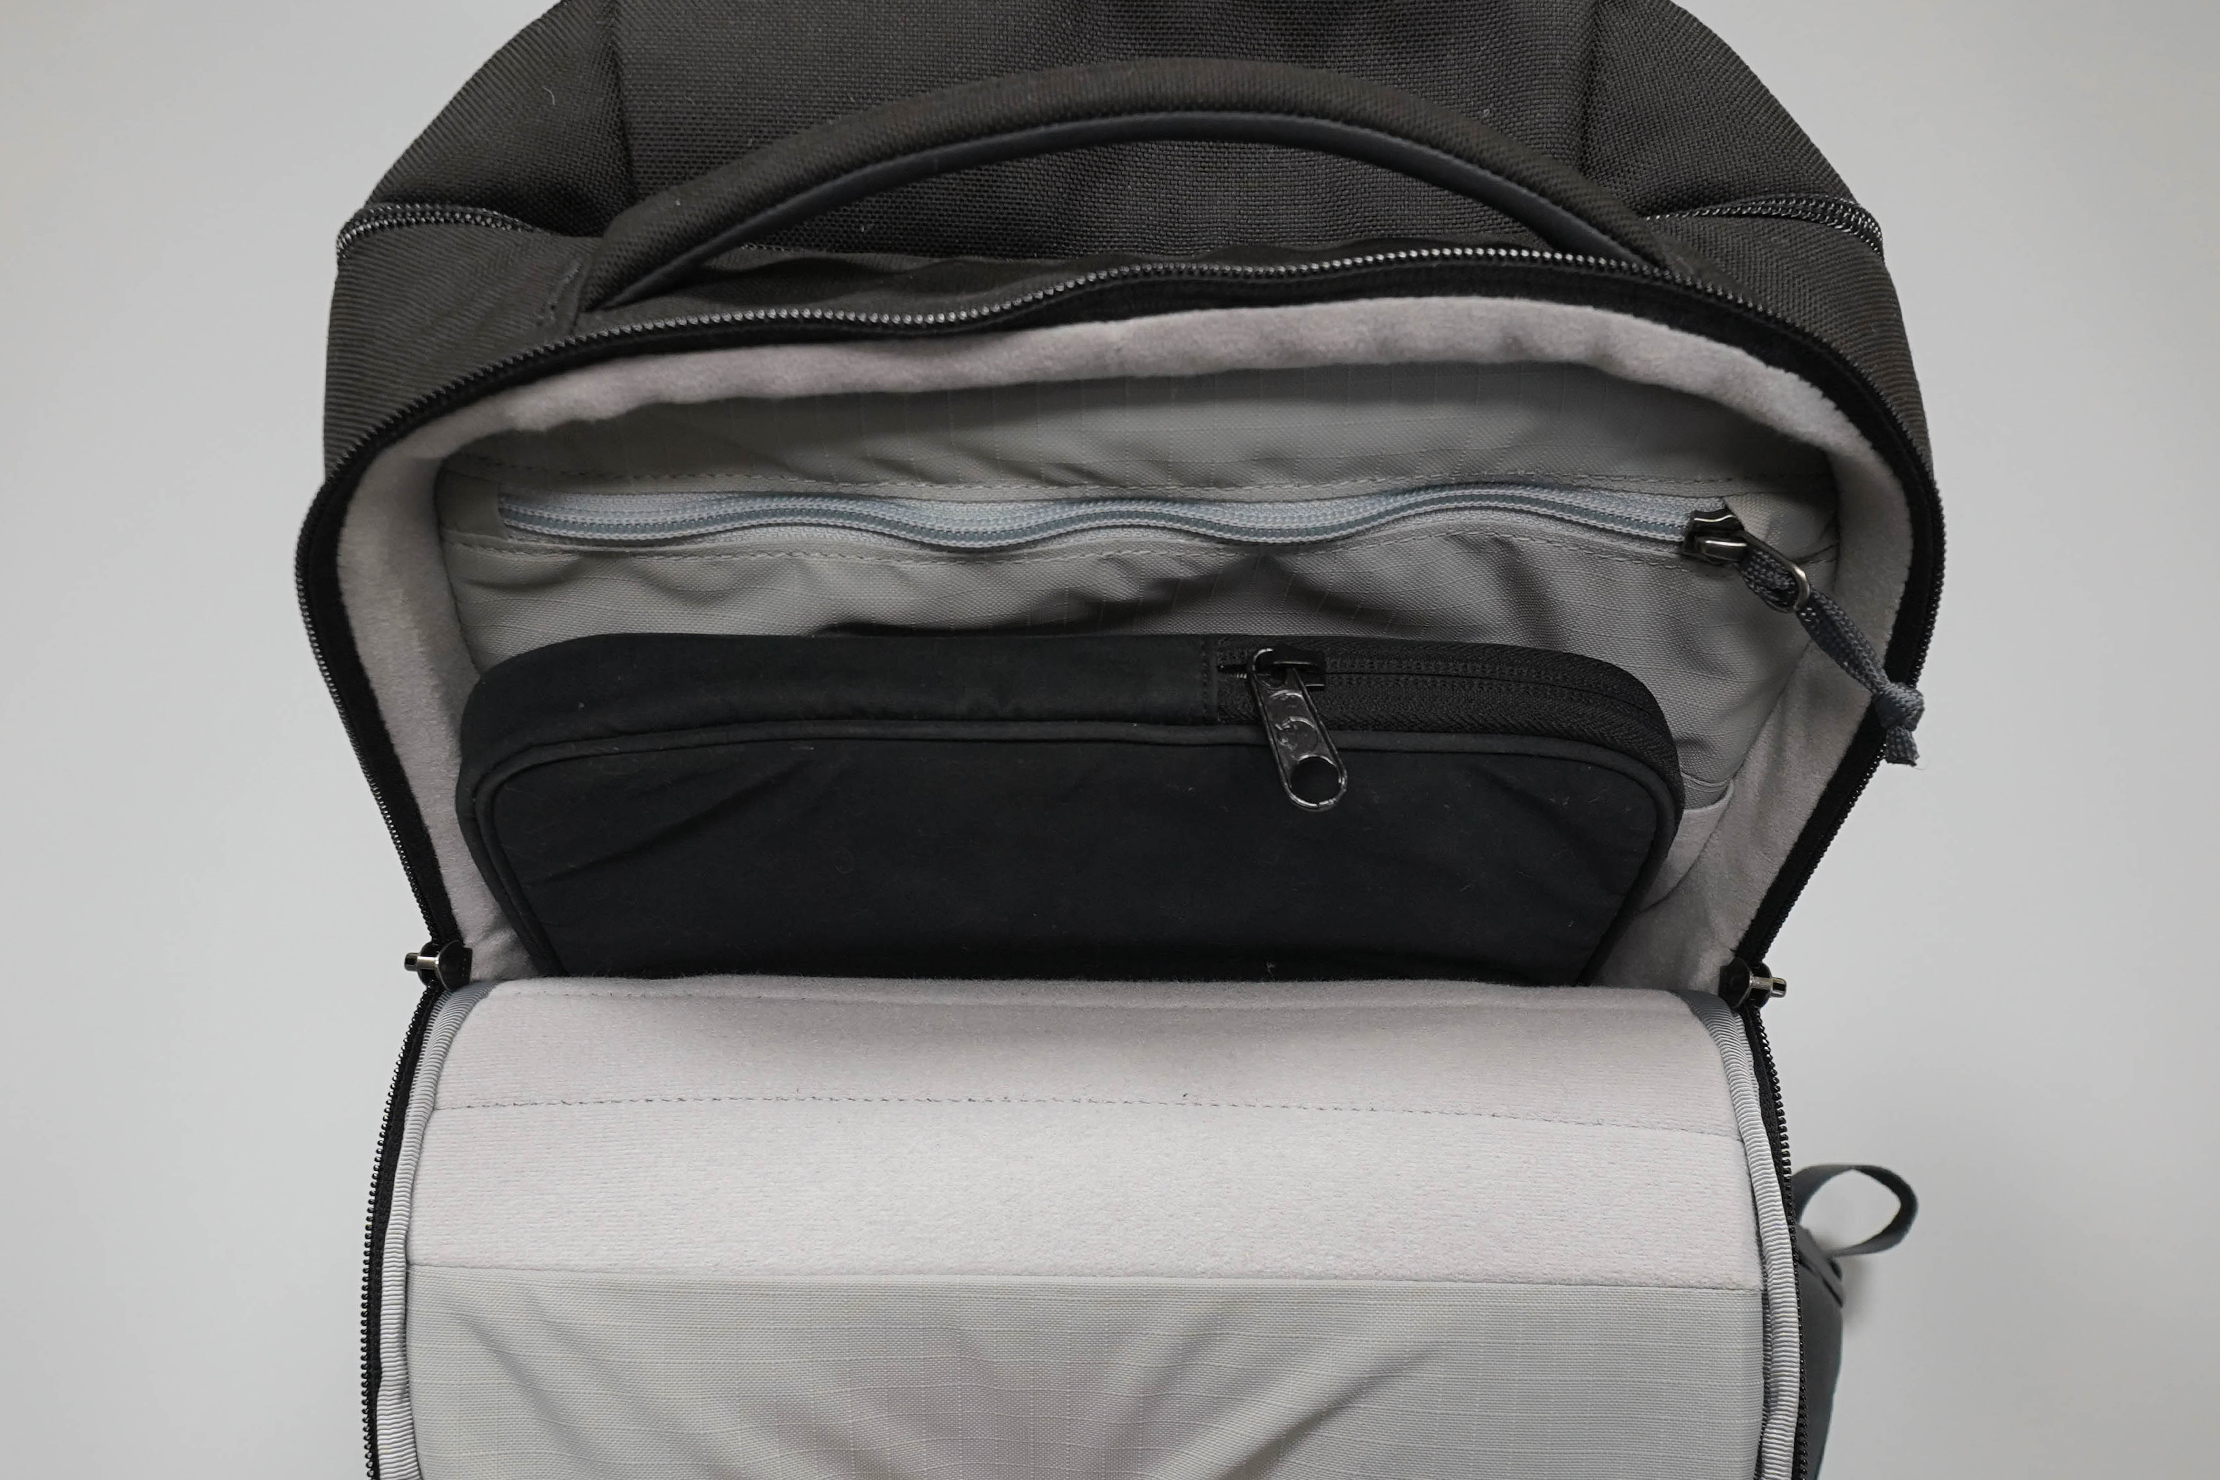 YETI Crossroads Backpack 23 Laptop Compartment